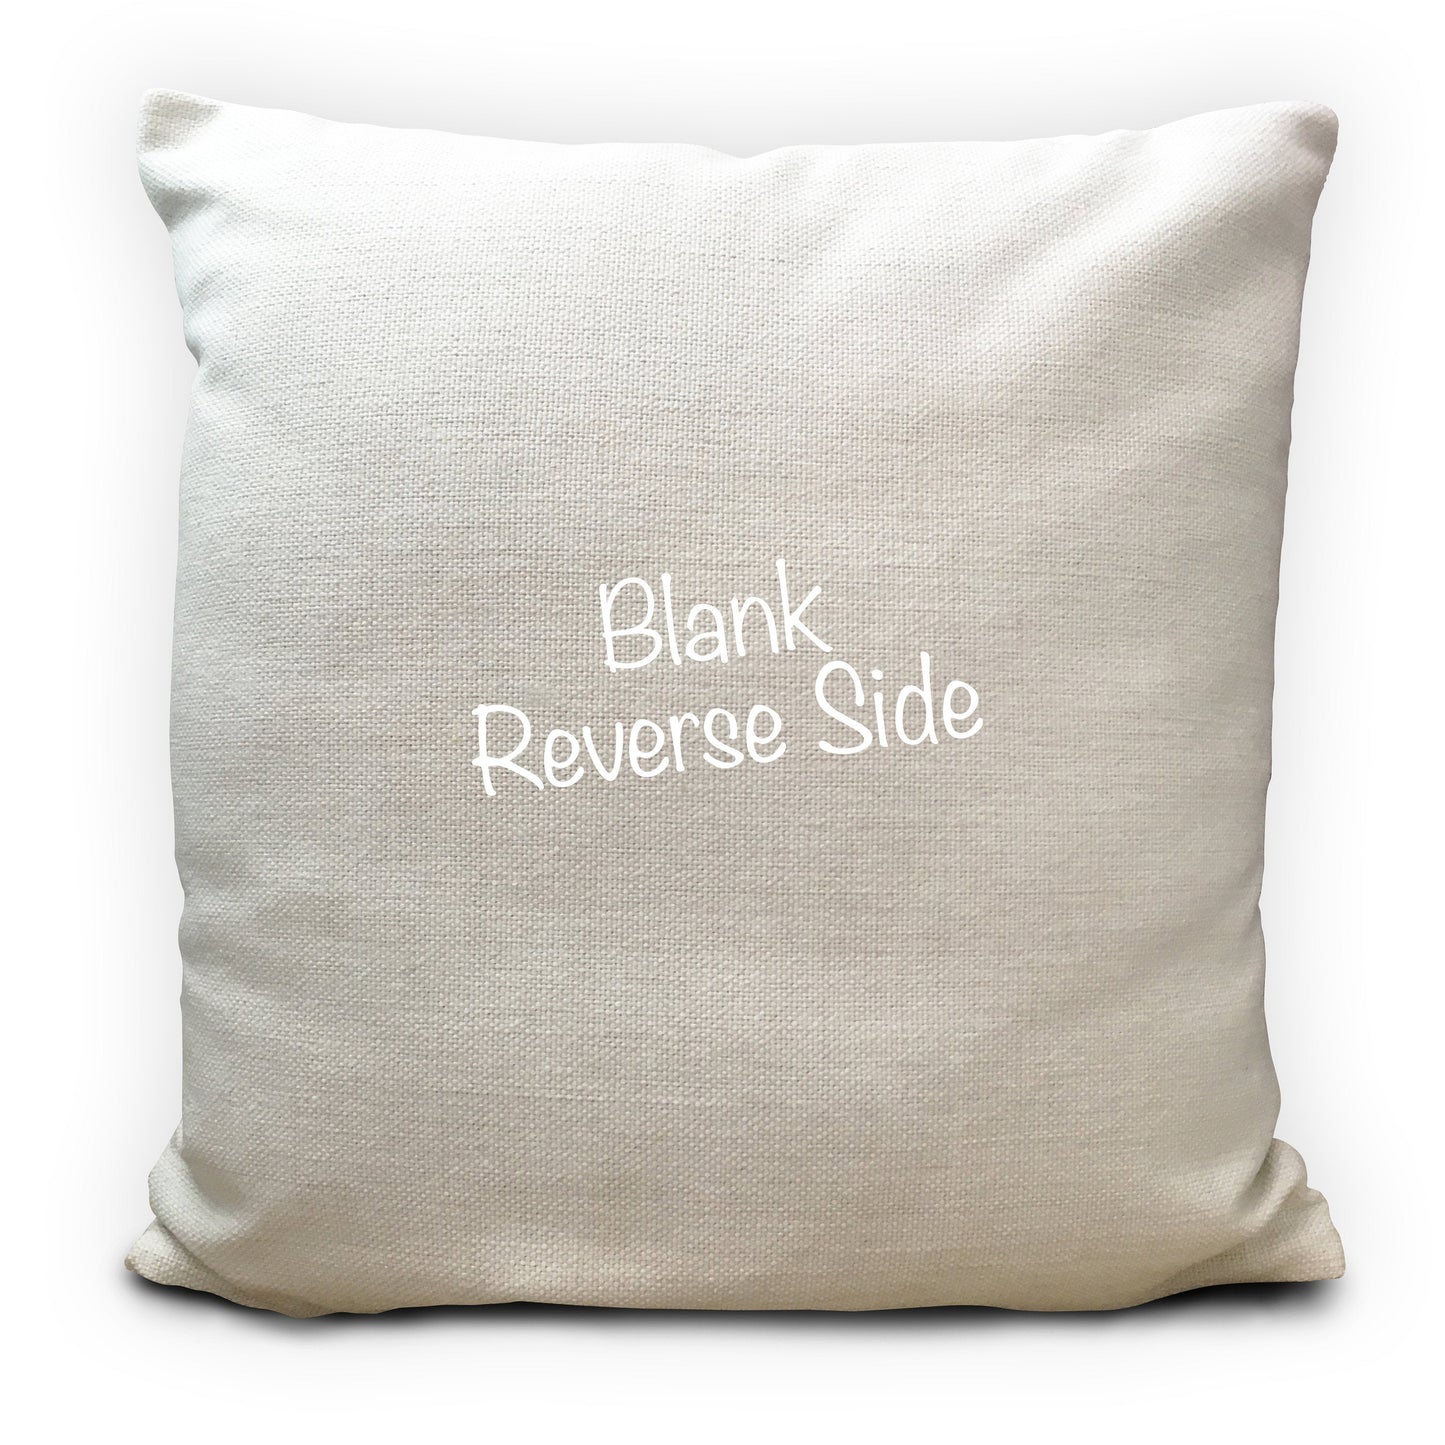 Personalised New Home Moving House Cushion Cover 16"